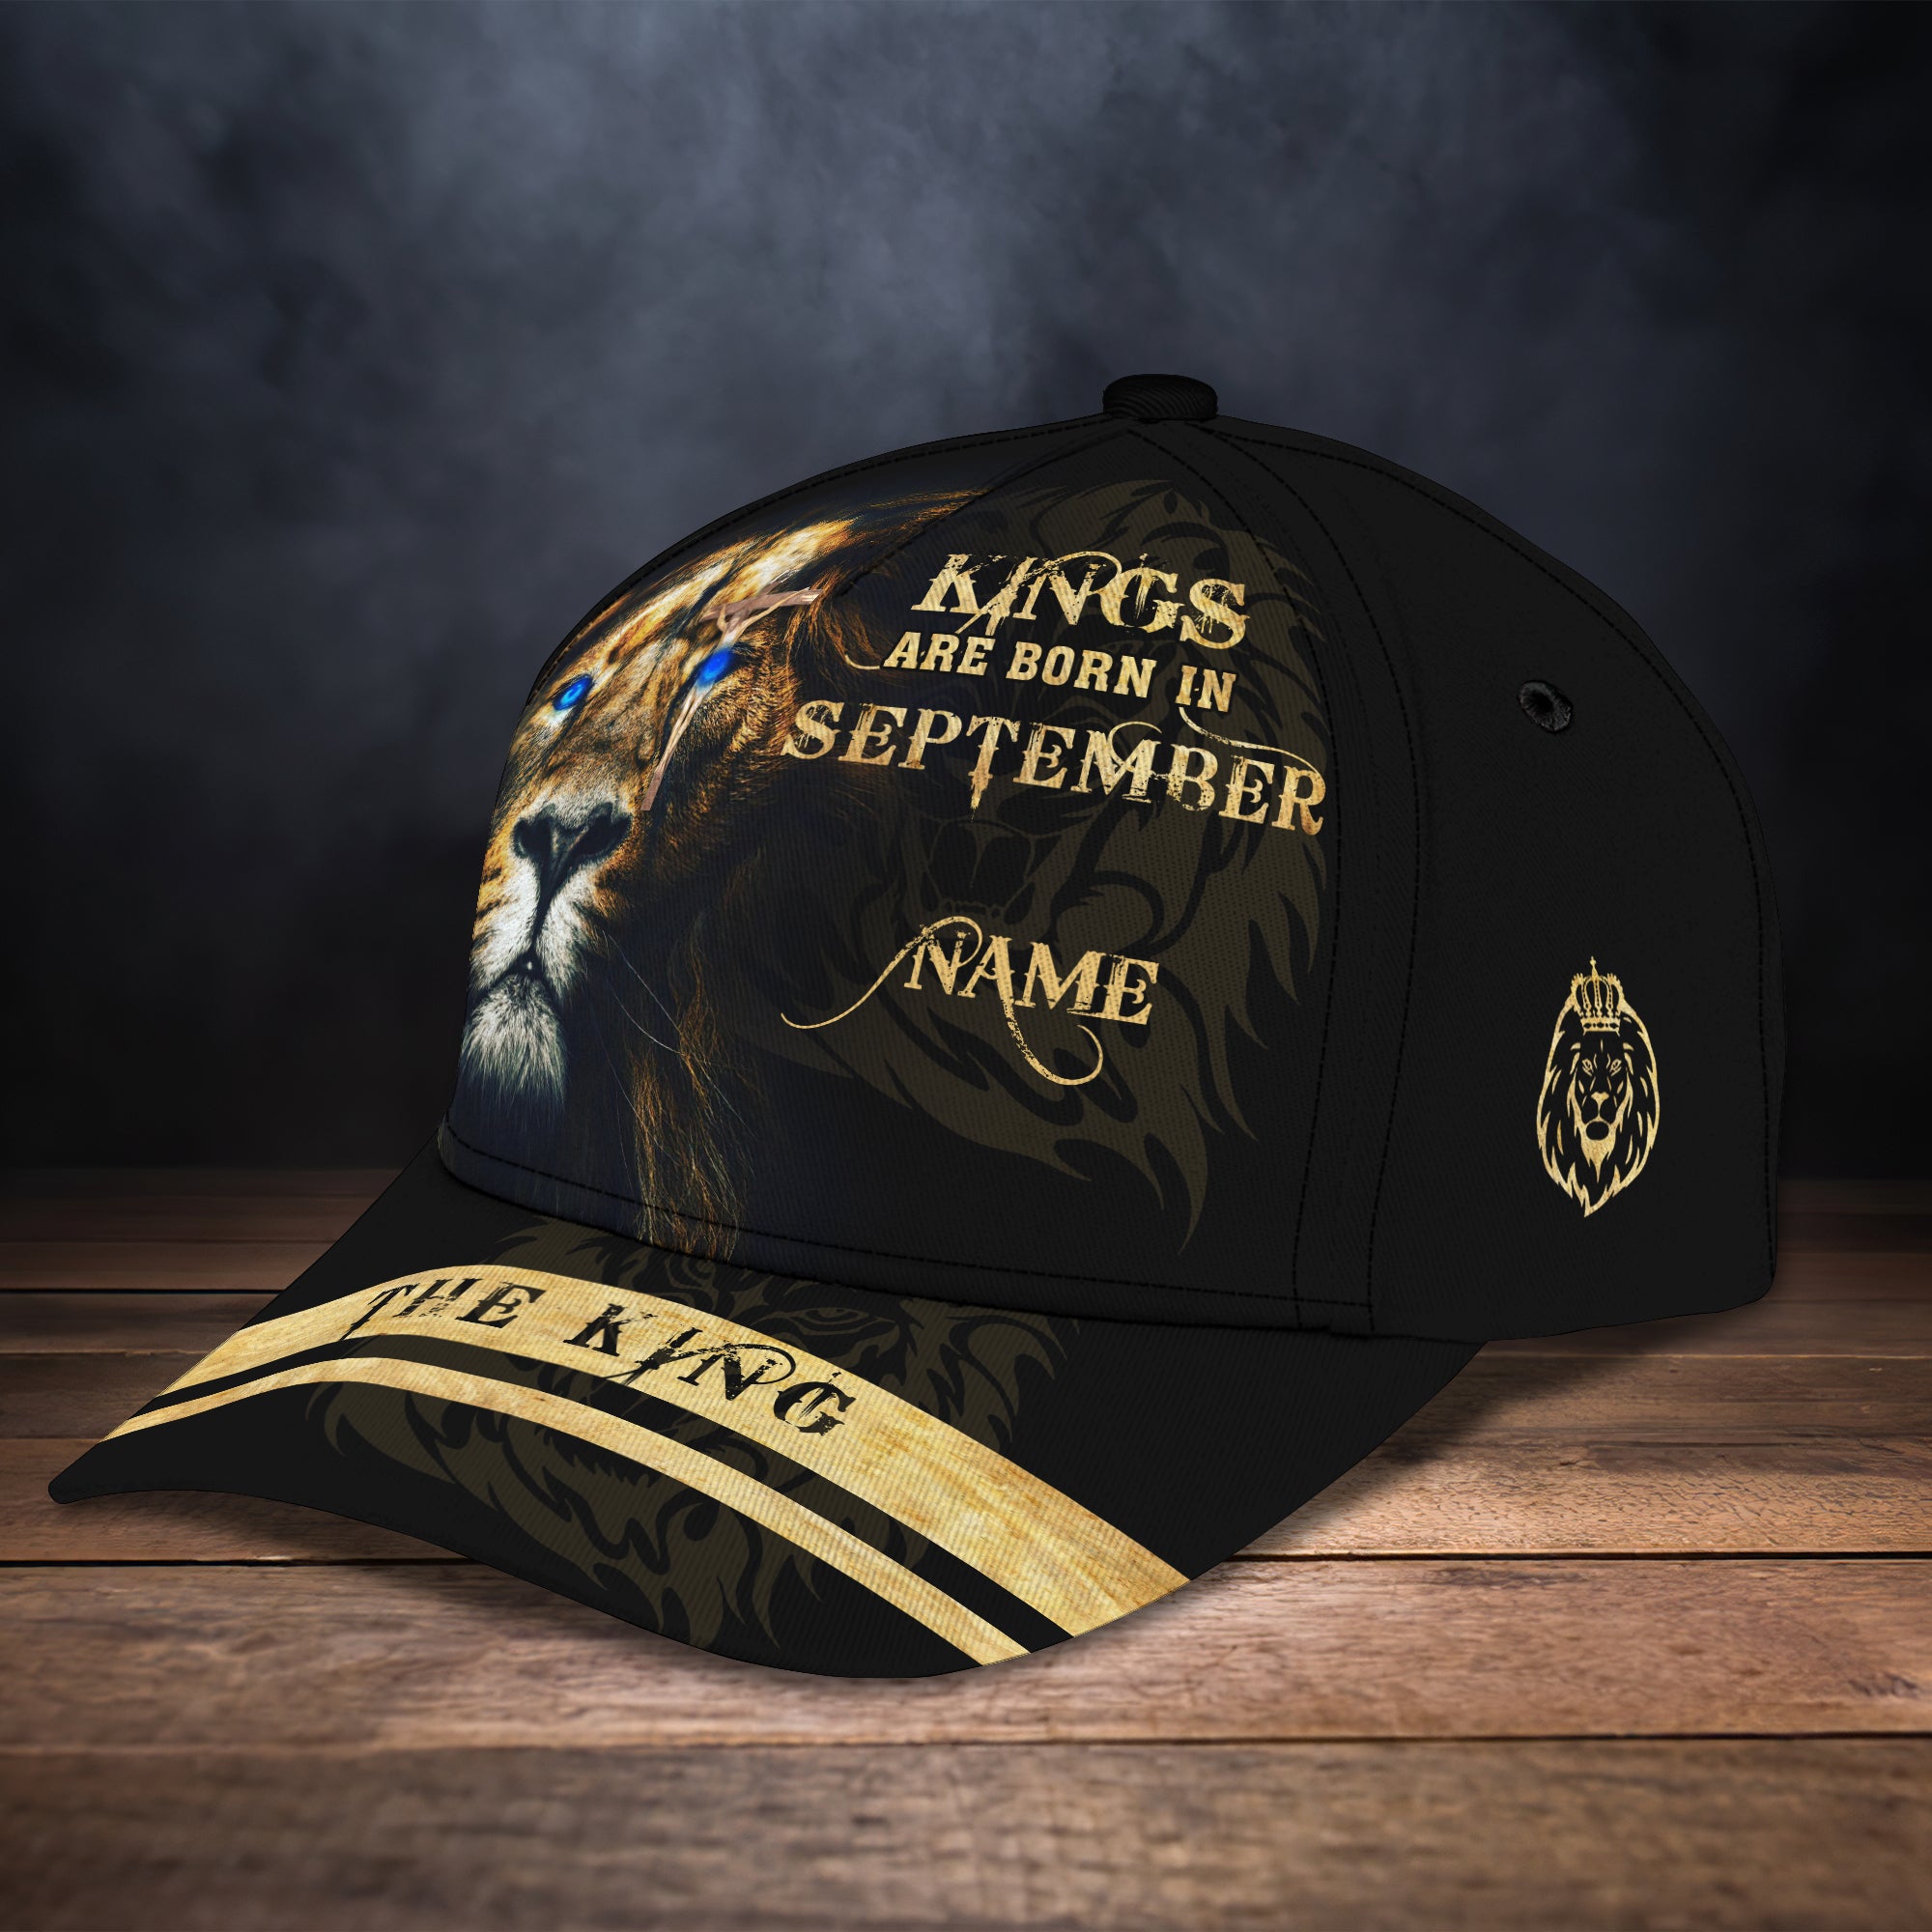 Kings Are Born In september - Personalized Name Cap 10 - LST149